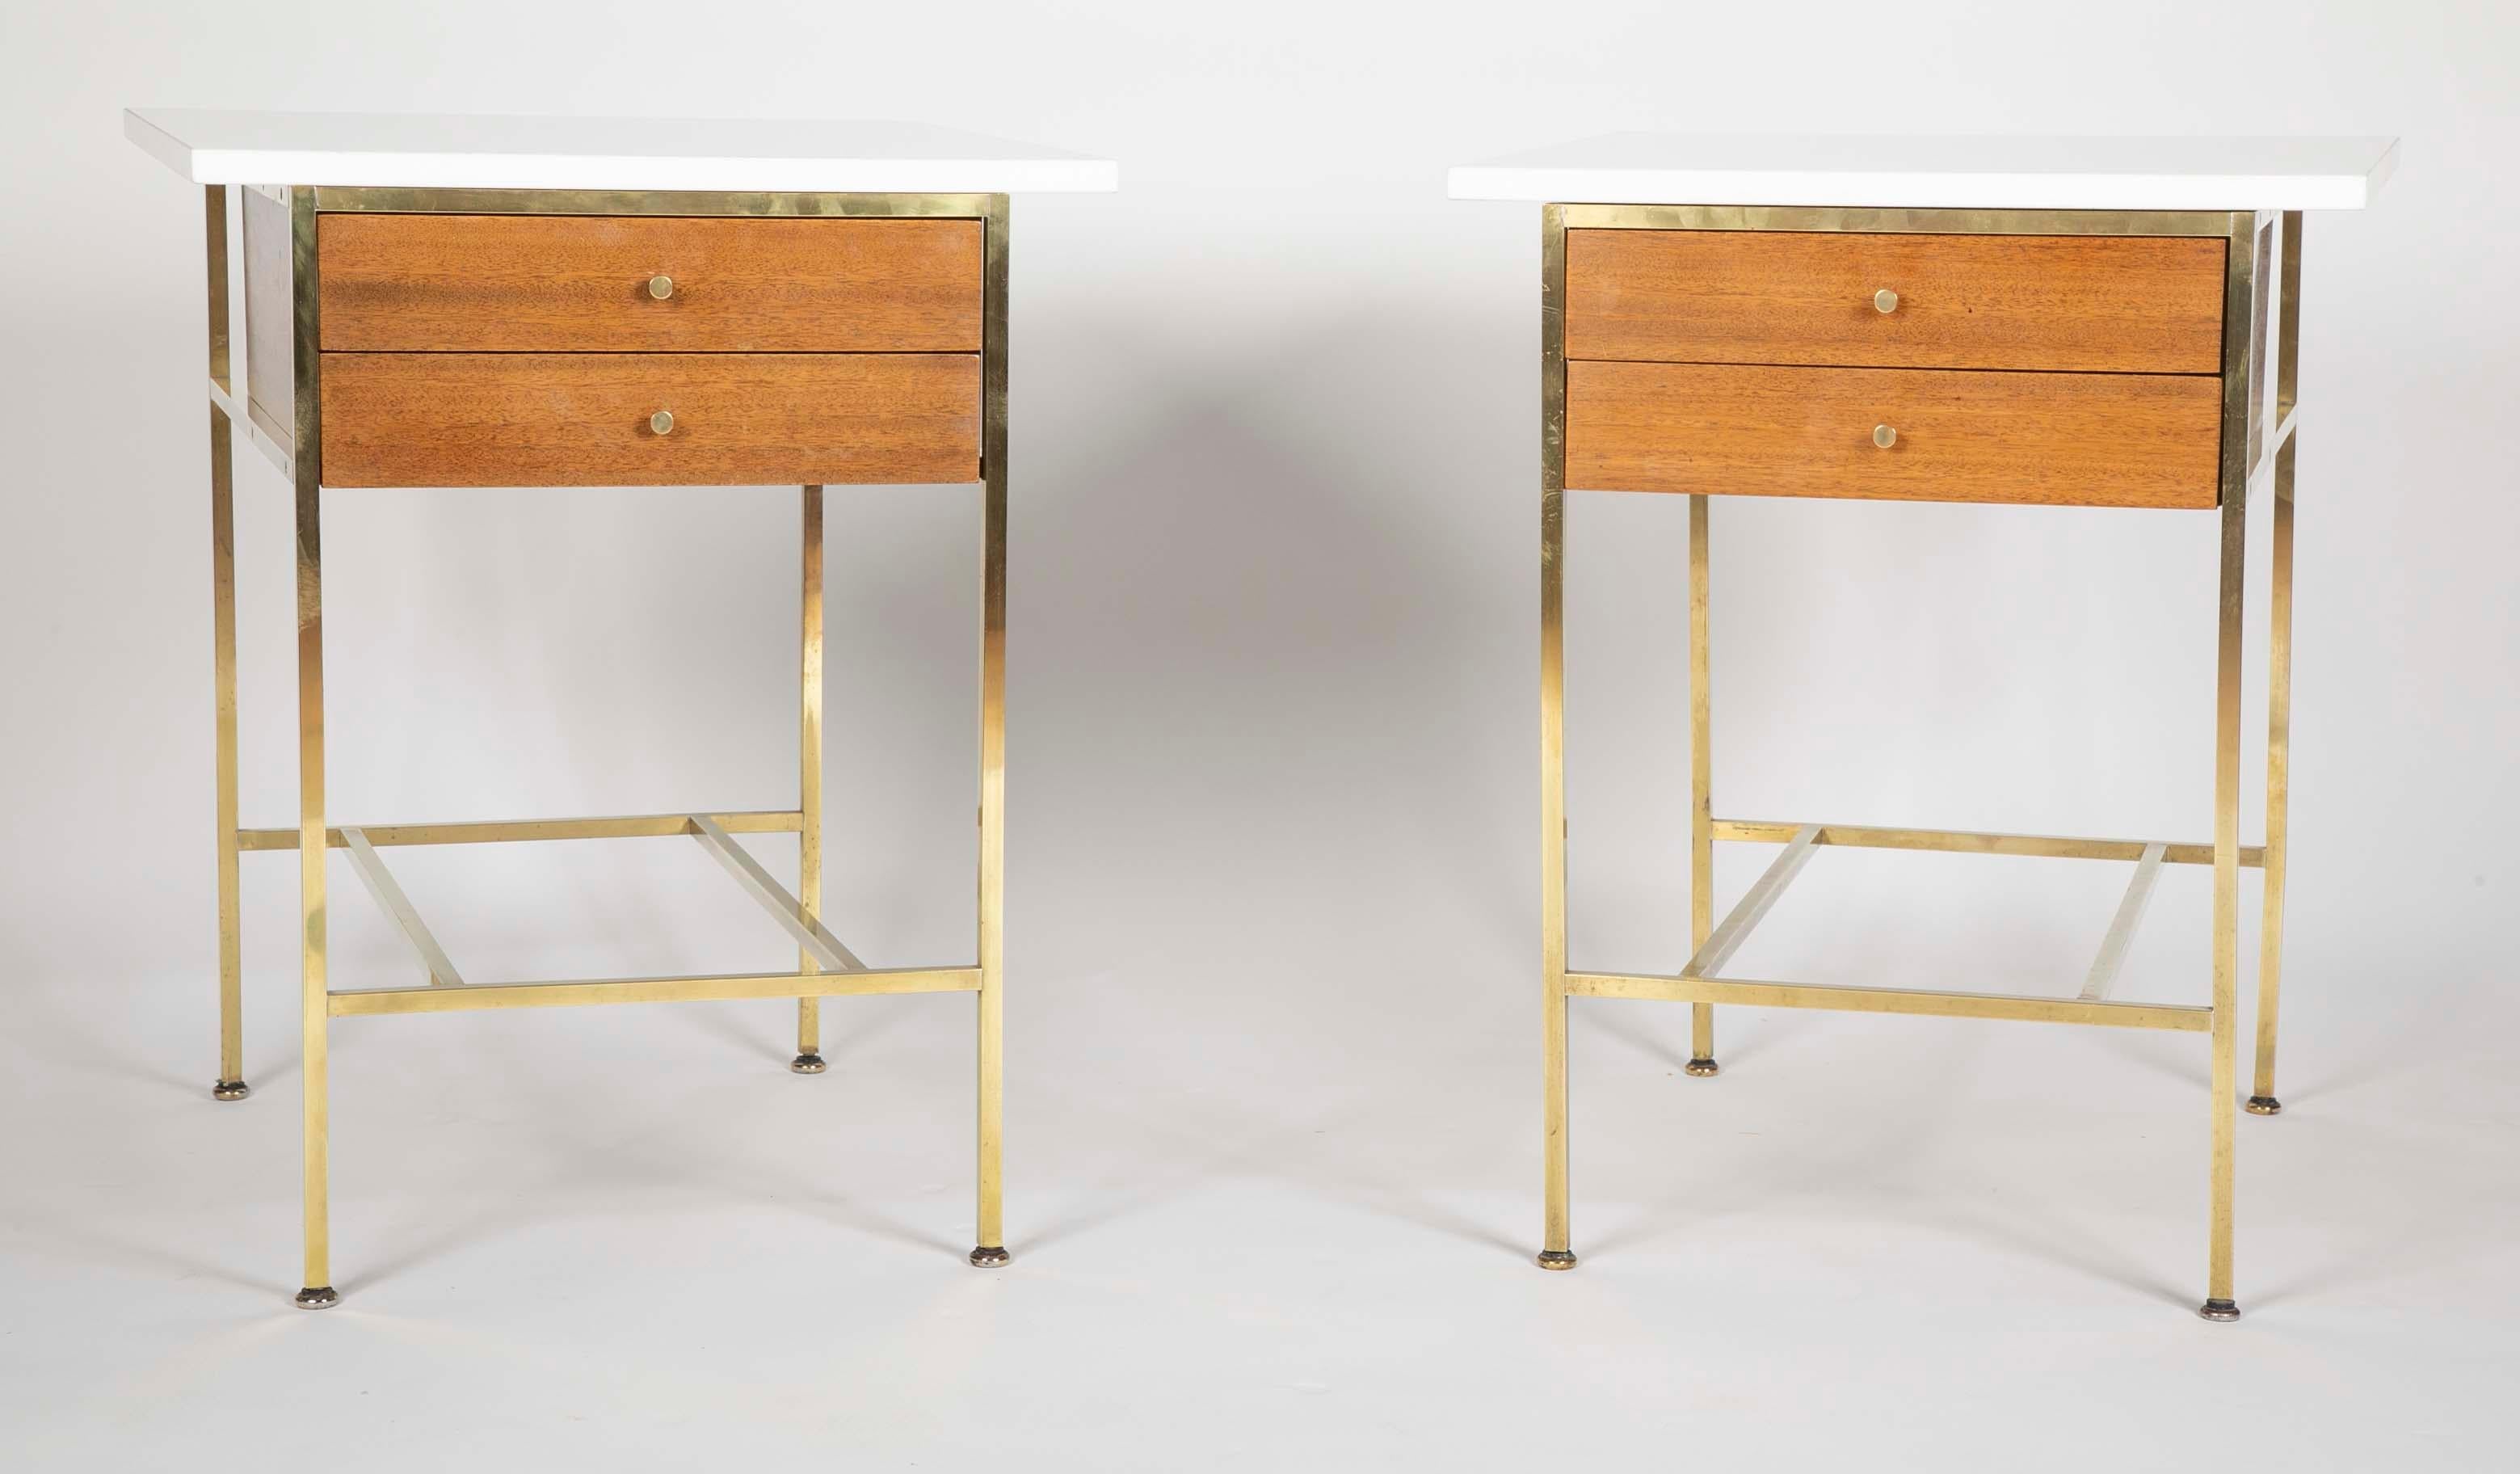 A pair of restored Model 8712 side tables. Designed by Paul McCobb for Calvin Furniture. The tables have Vitrolite (milk glass) tops. Period Travertine Marble tops also available in place of the Vitrolite tops.